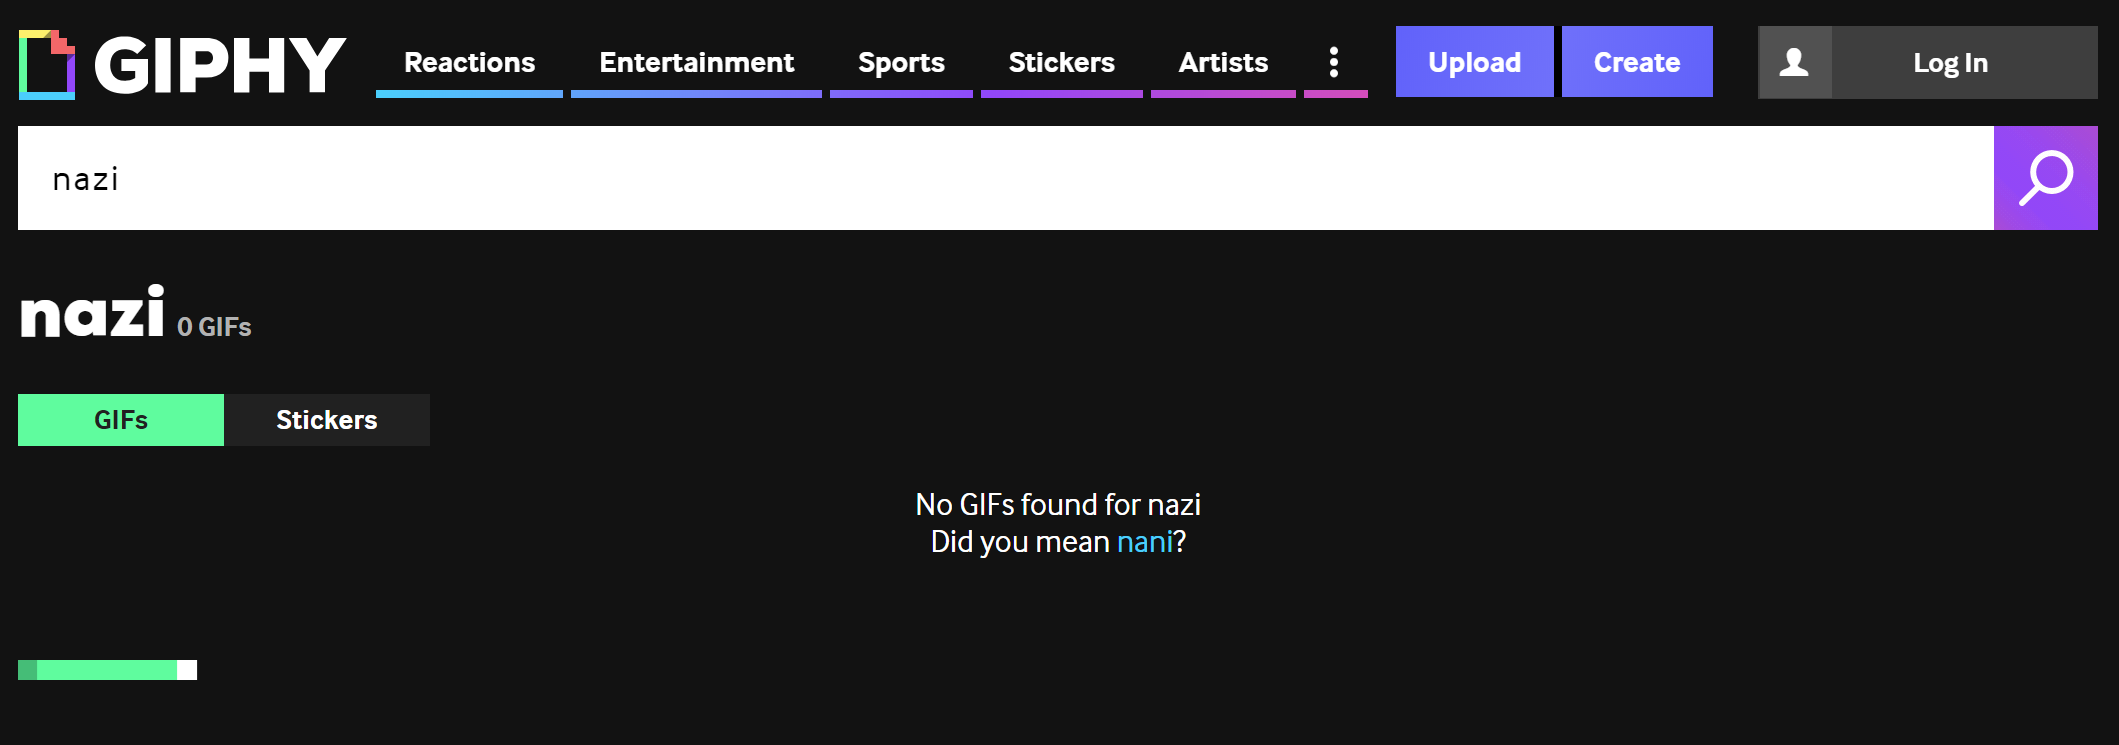 Giphy search for 'nazi', resulting in 'No GIFs found for nazi'